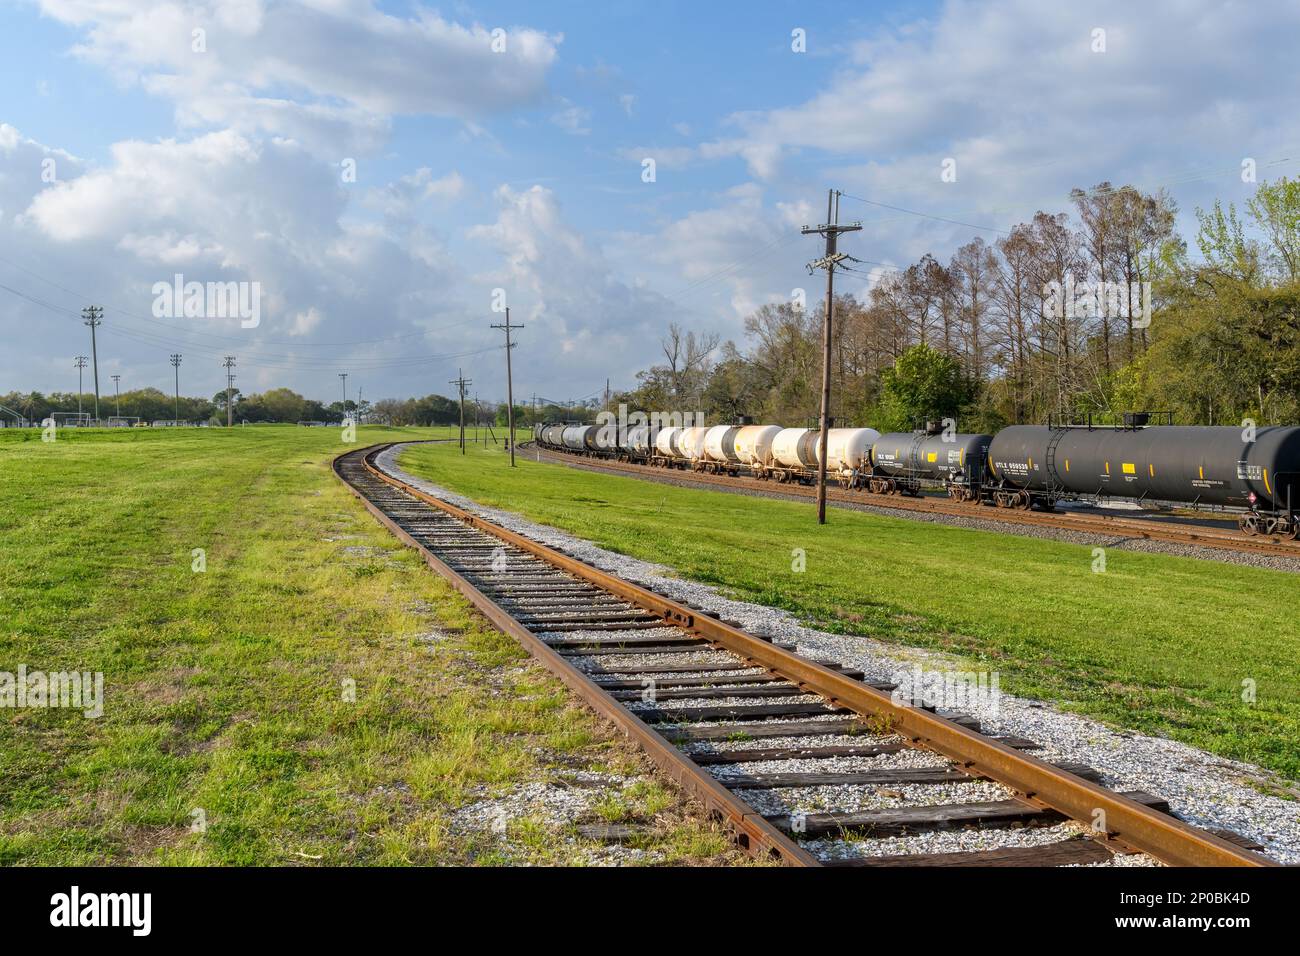 NEW ORLEANS, LA, USA - MARCH 1, 2023: Train with tank cars hauling hazardous materials passes through heavily populated area in Uptown New Orleans Stock Photo